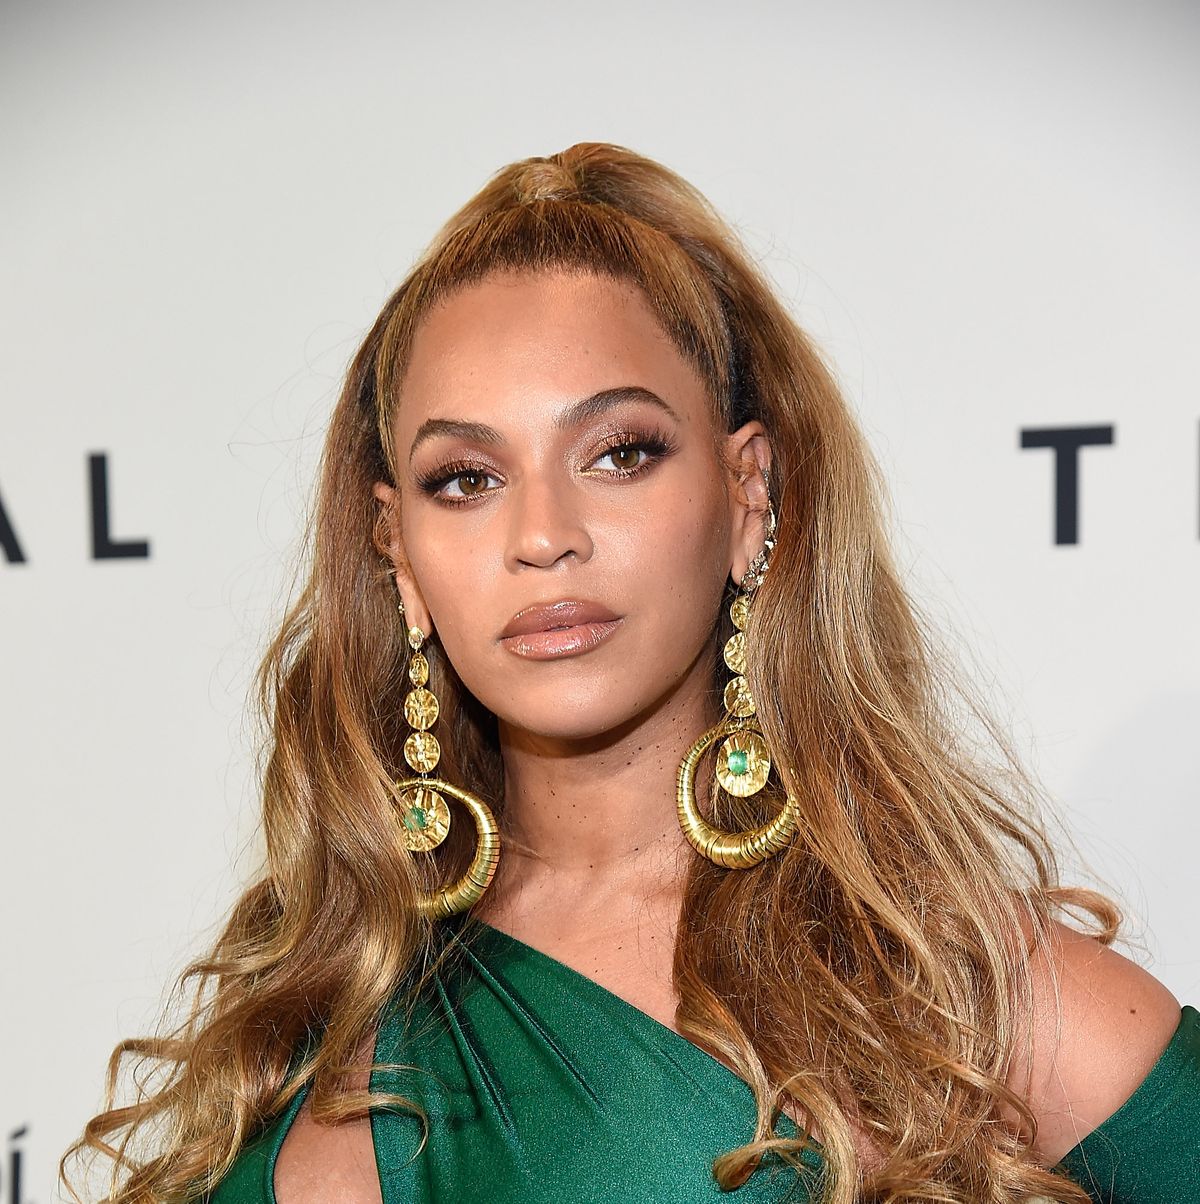 Beyonce Sex Video - BeyoncÃ© to re-record part of album following backlash over lyric